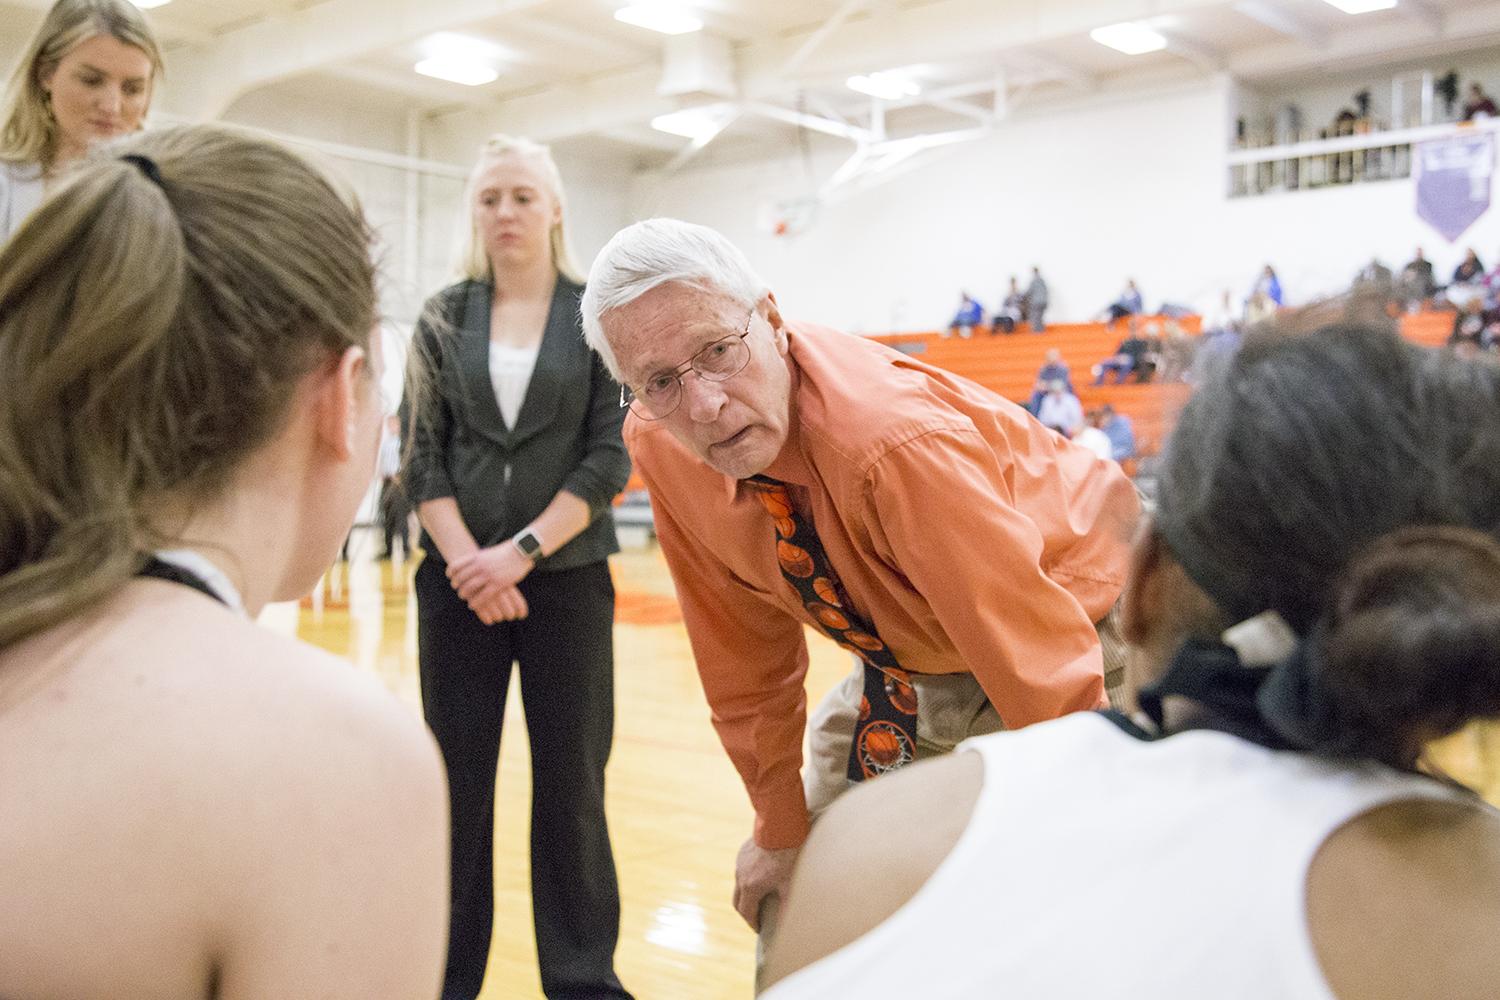 Coach Ken Swartz talks to his women's basketball team on the sidelines of a basketball game